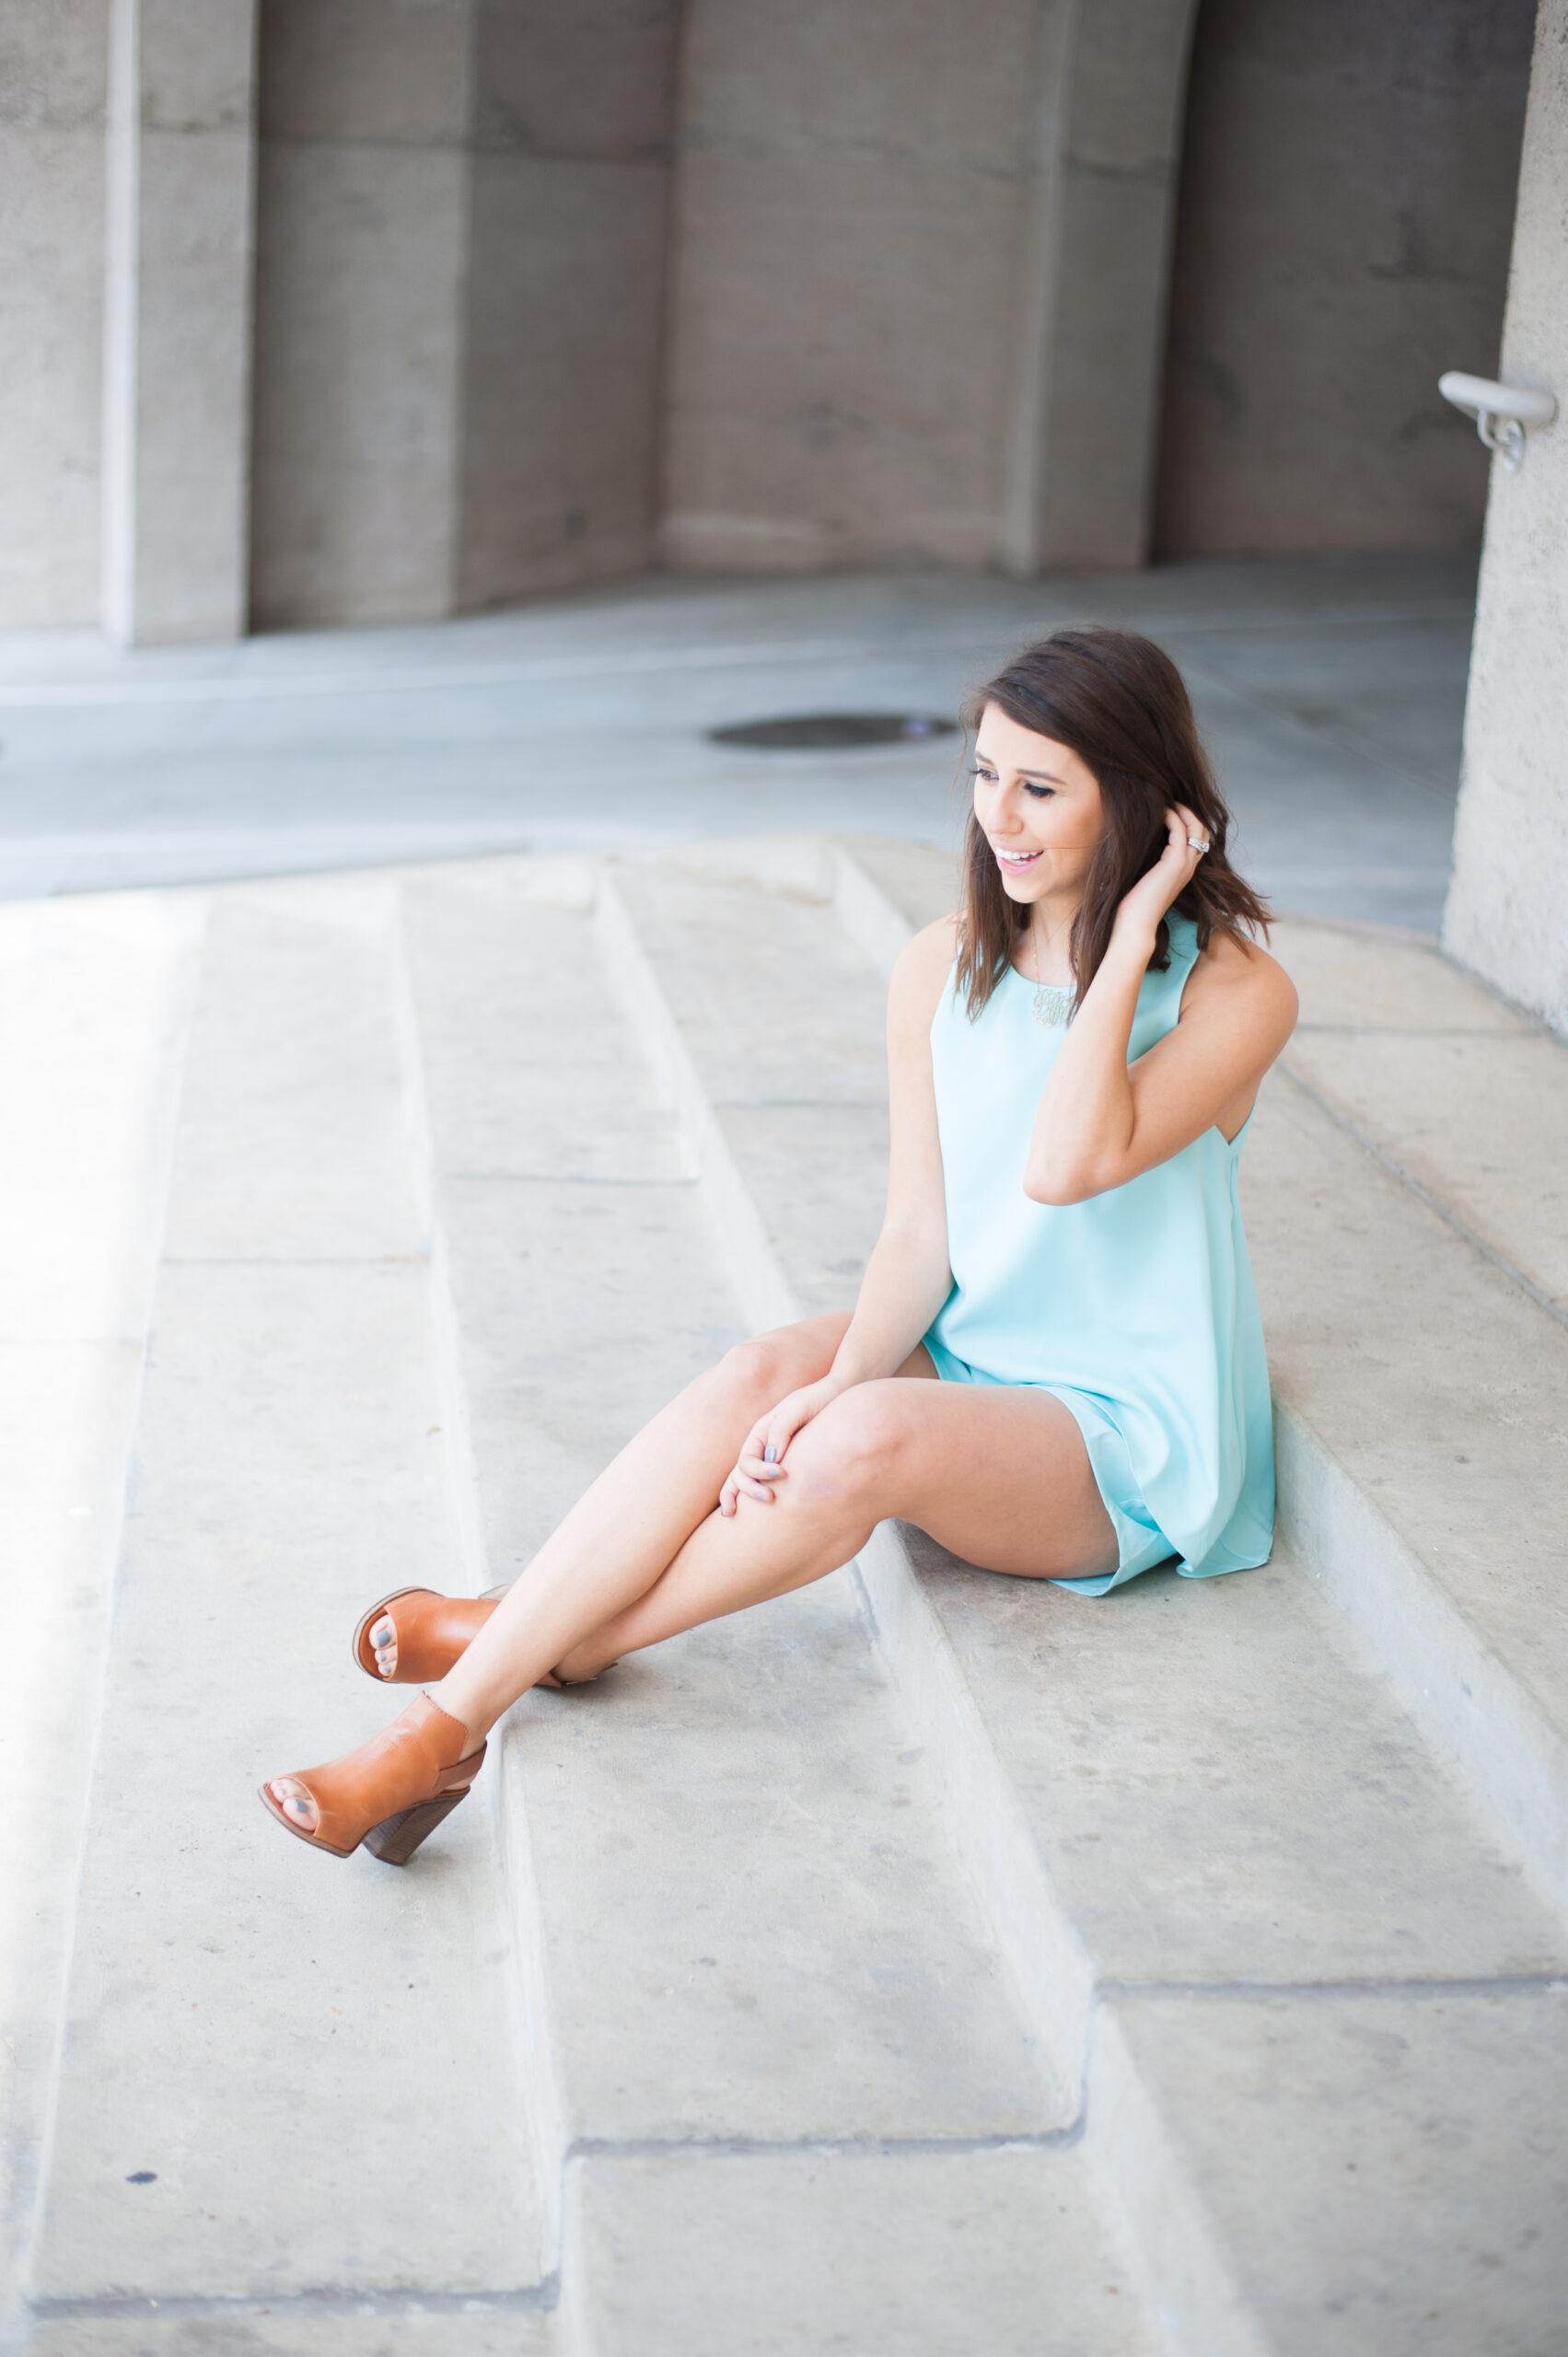 Dress Up Buttercup | Houston Fashion Blog - Dede Raad Pantone with Thrive 